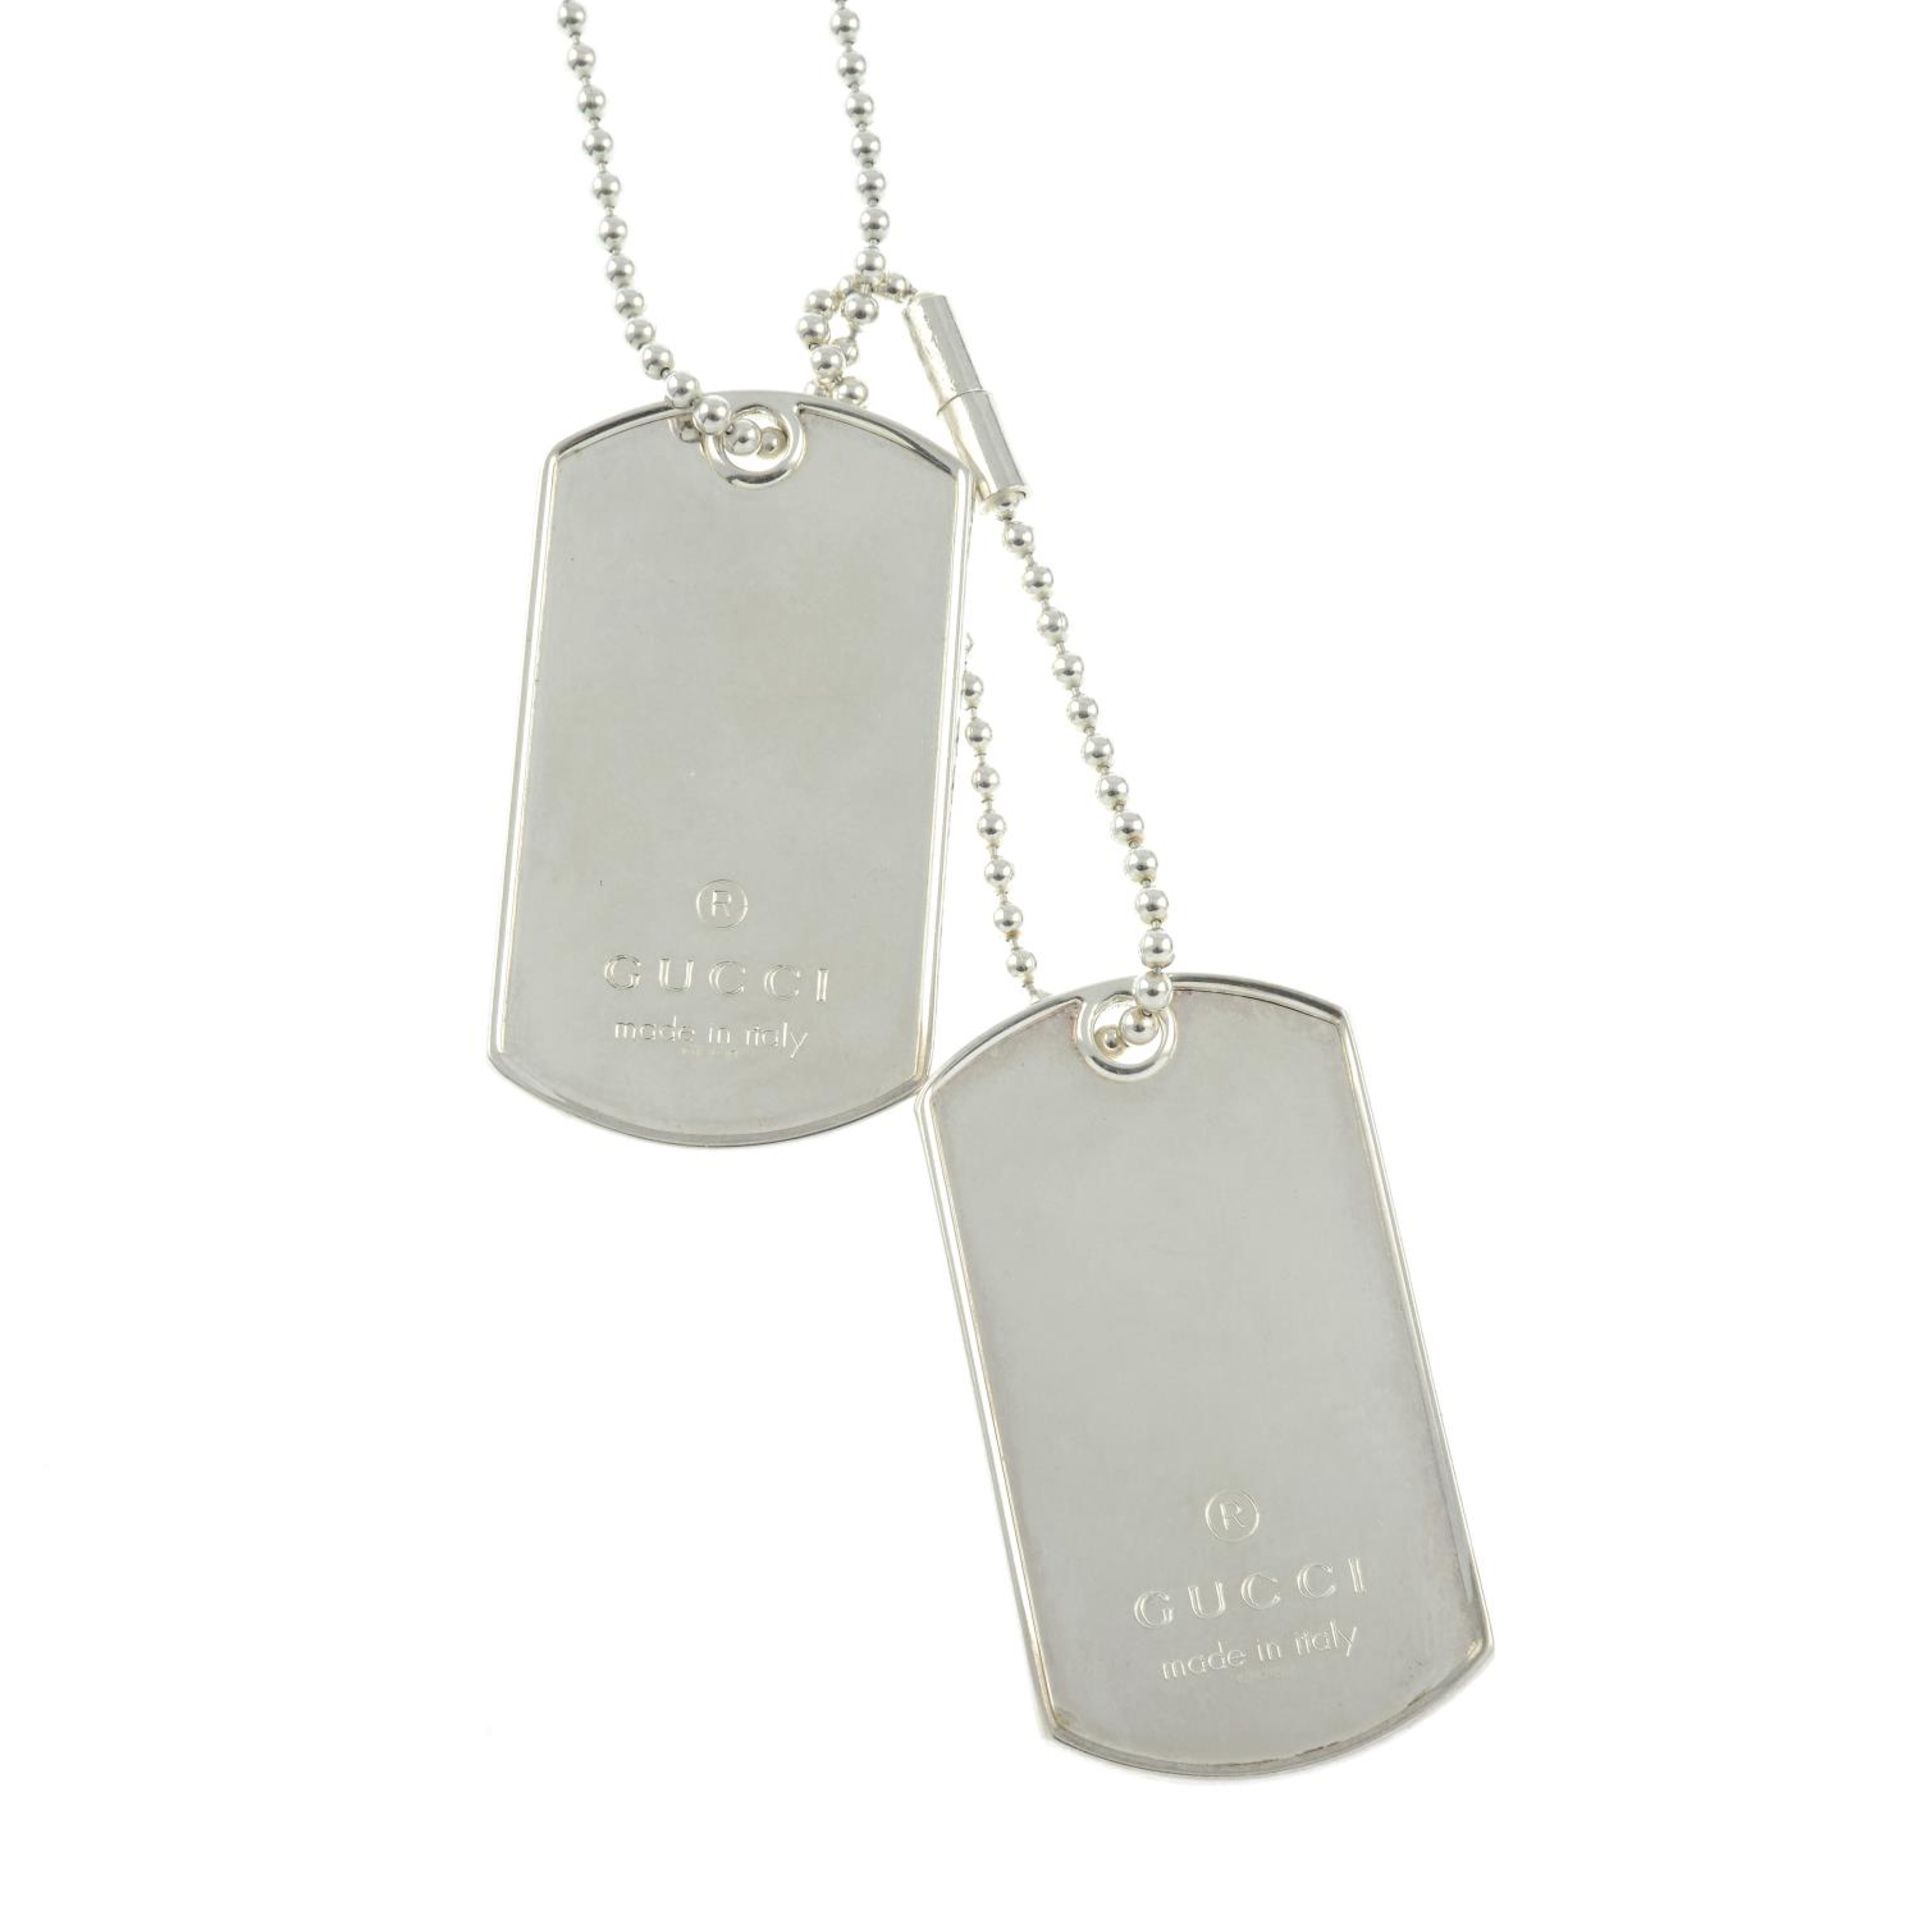 A silver dog tag and ball-chain necklace, by Gucci.Signed Gucci.